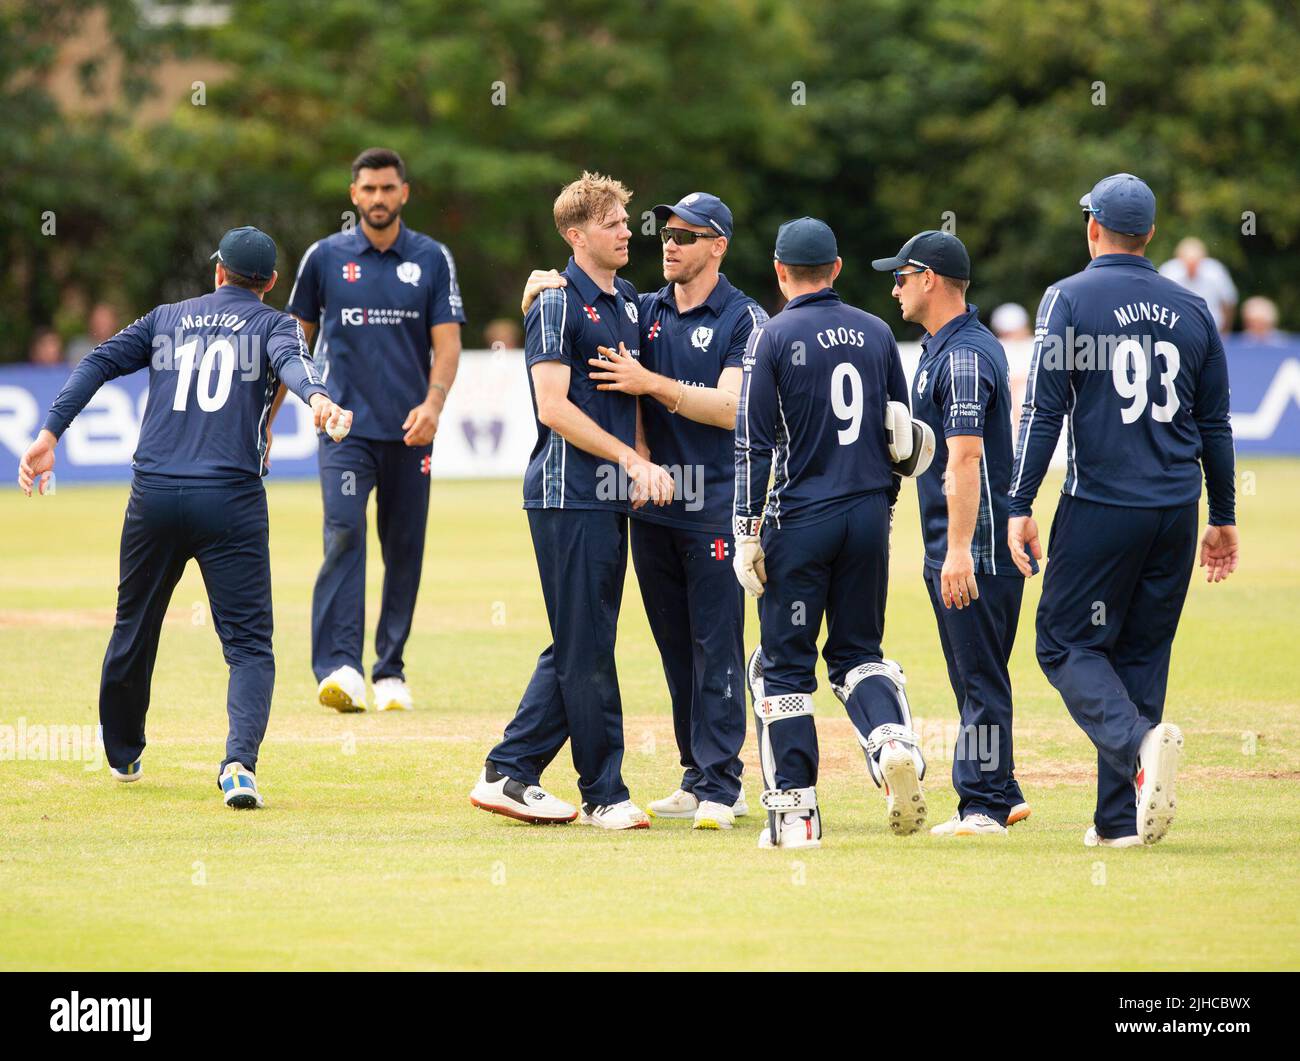 ICC Men's Cricket World Cup League 2 - Scotland v, Nepal. 17th July, 2022. Scotland take on Nepal for the second time in the ICC Div 2 Men's Cricket World Cup League 2 at Titwood, Glasgow. Pic shows: Scotland's Gavin Main is is mobbed by teammates after dismissing NepalÕs Dev Khanal for 10 runs. Credit: Ian Jacobs/Alamy Live News Stock Photo